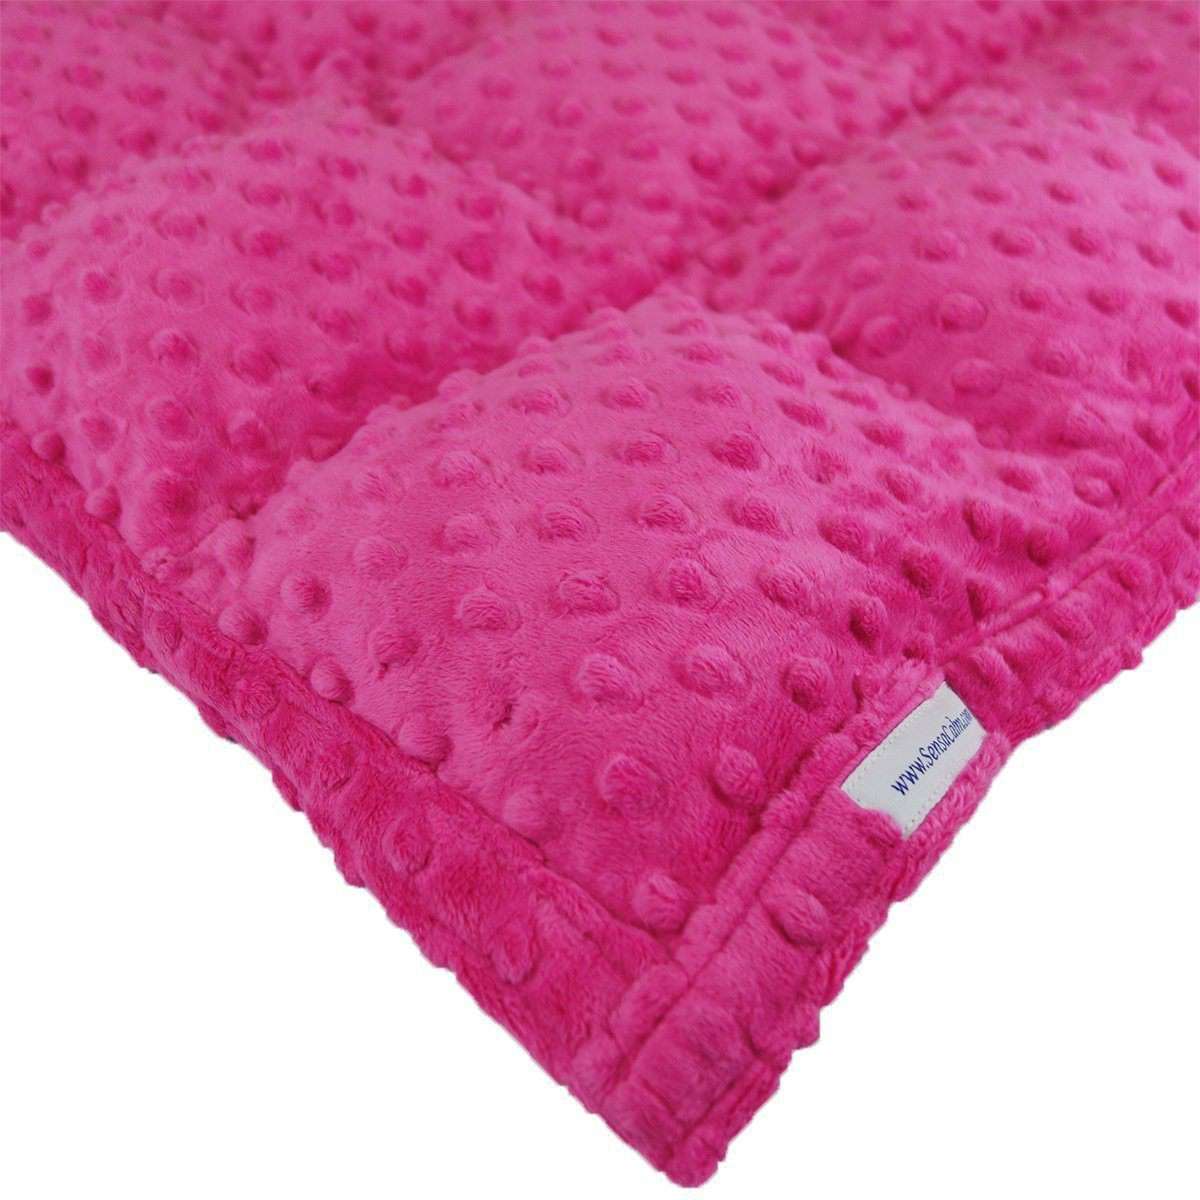 Dimple Cuddle Weighted Blanket - Fuchsia